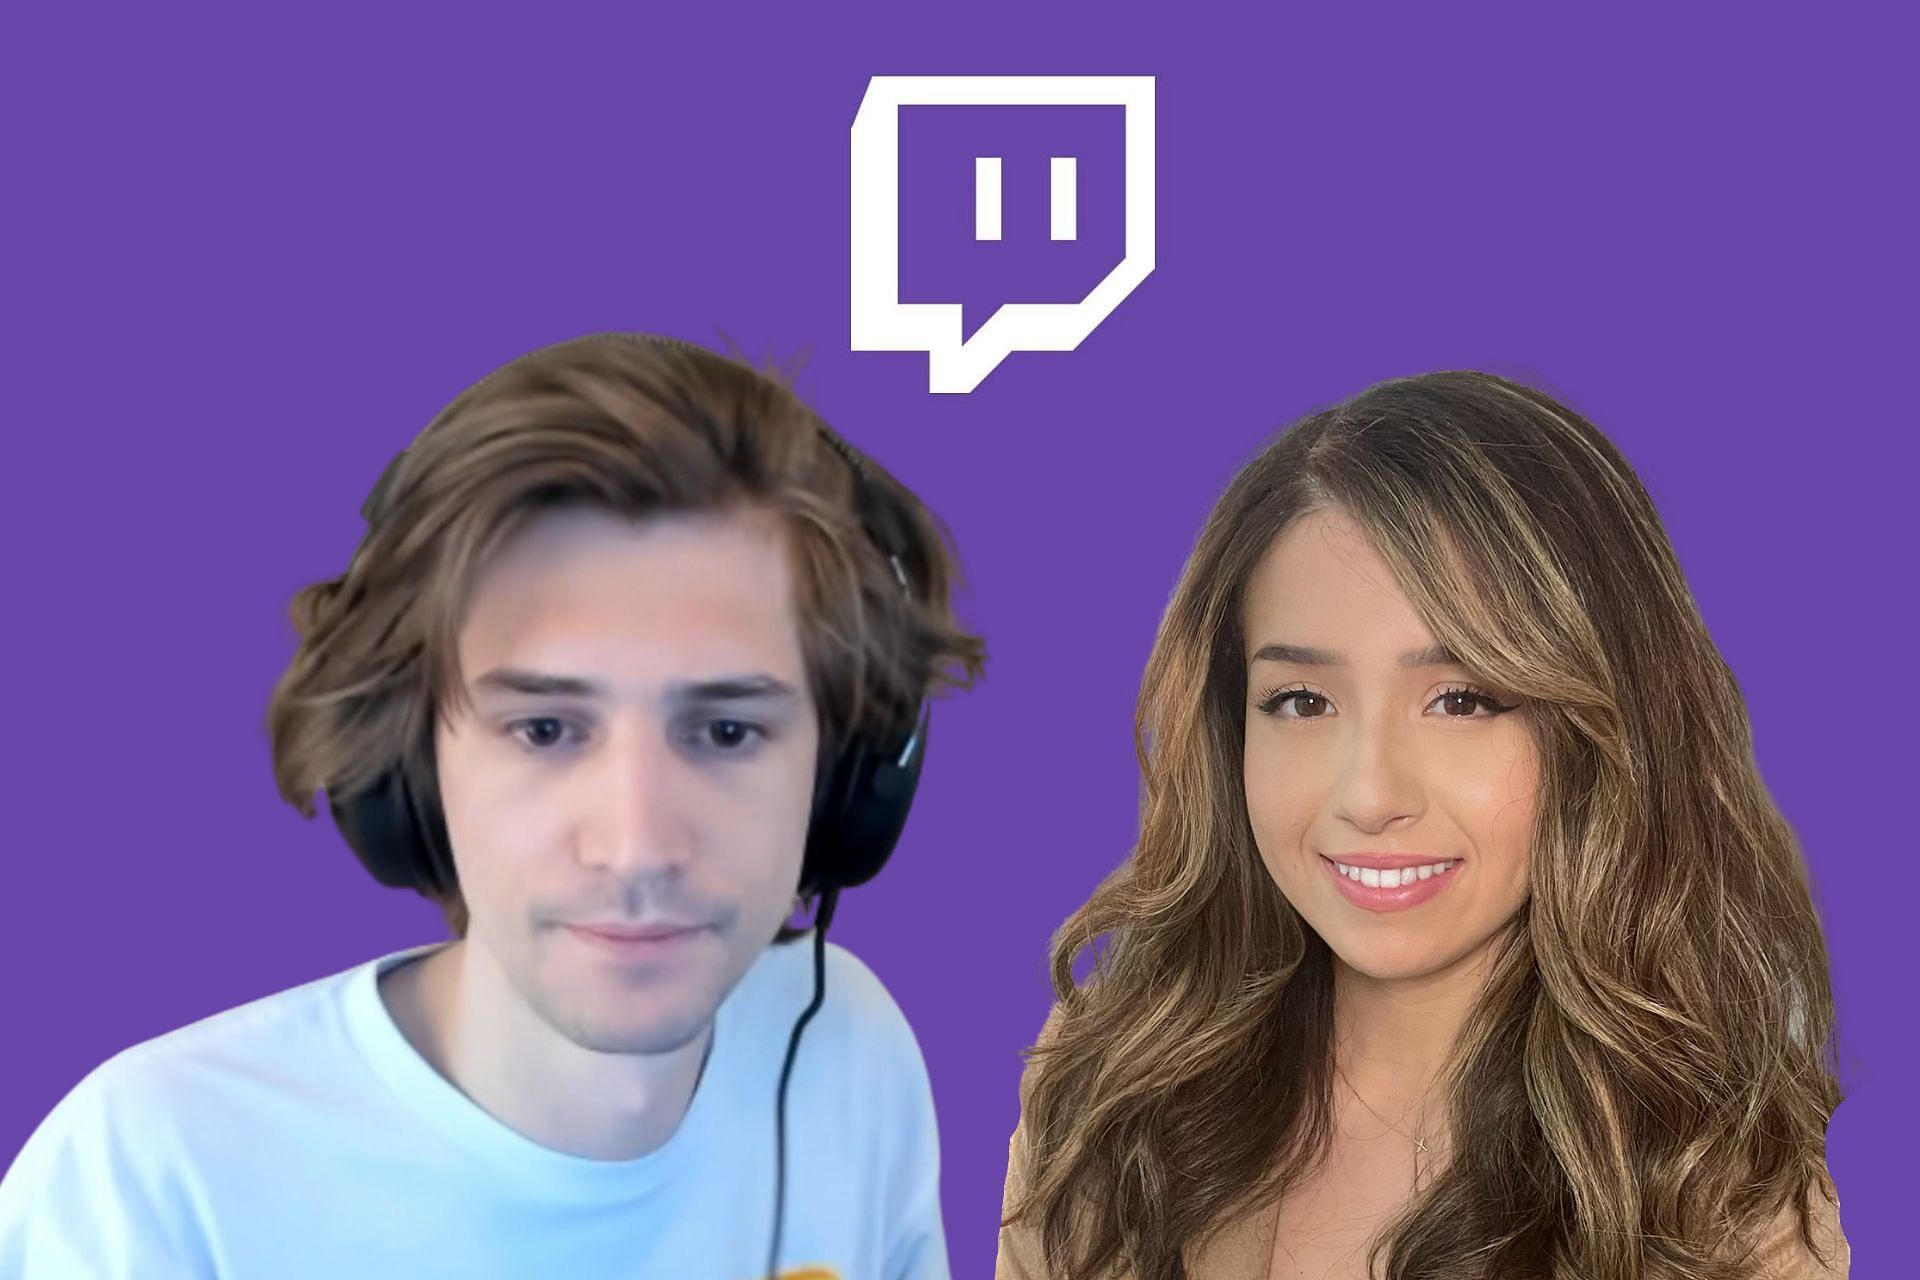 xQc and Pokimane may be starting a podcast in the near future (Image via Sportskeeda)